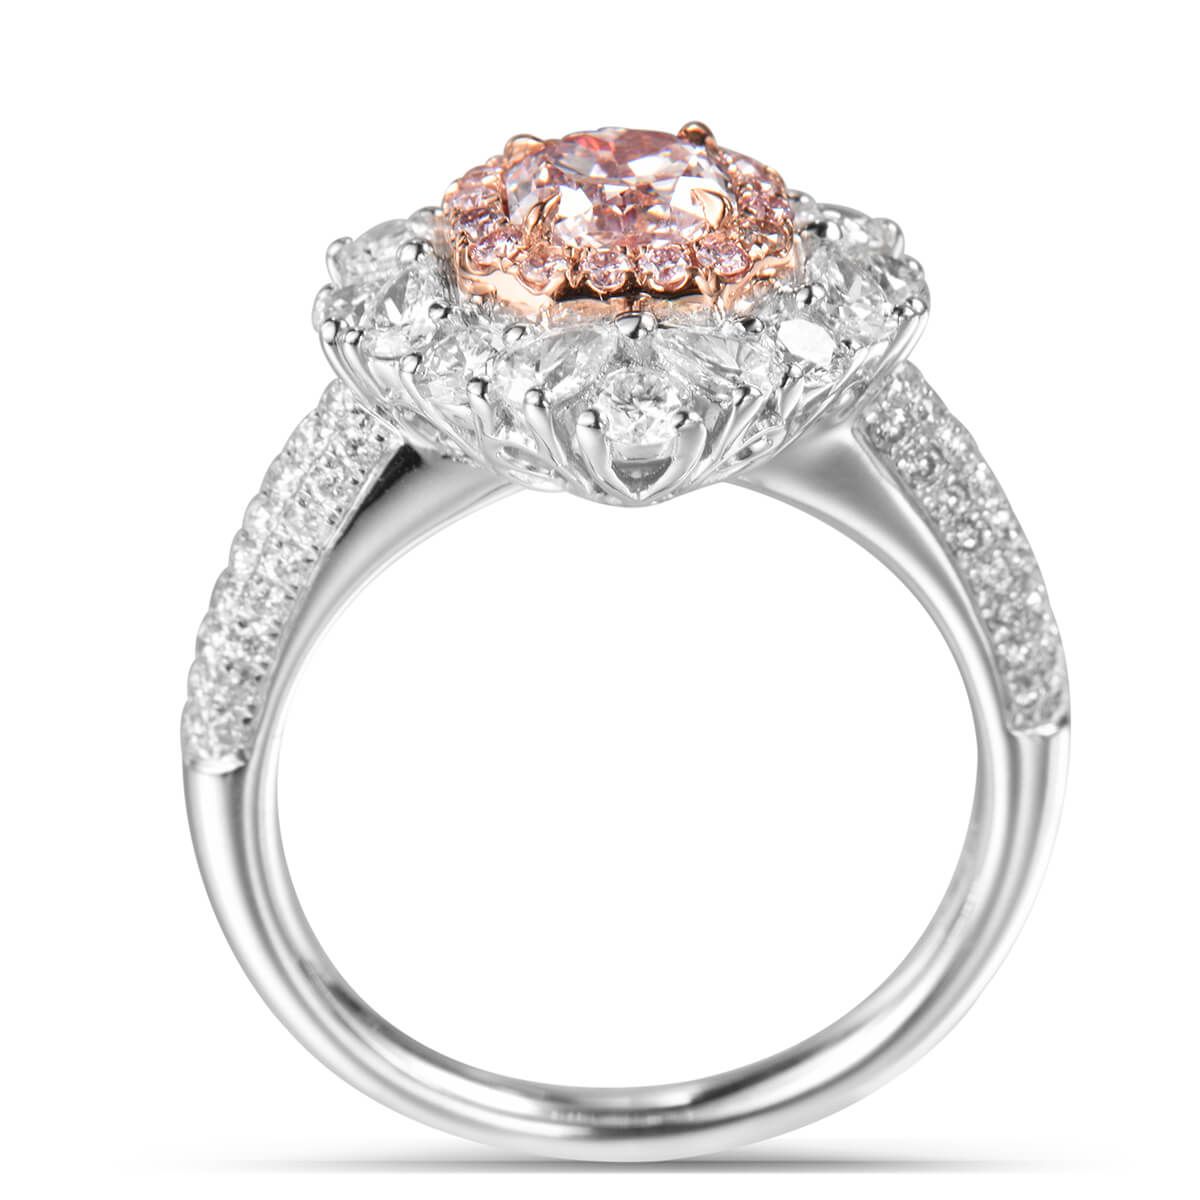 Faint Pink Diamond Ring, 2.78 Ct. TW, Radiant shape, GIA Certified, 2175042113